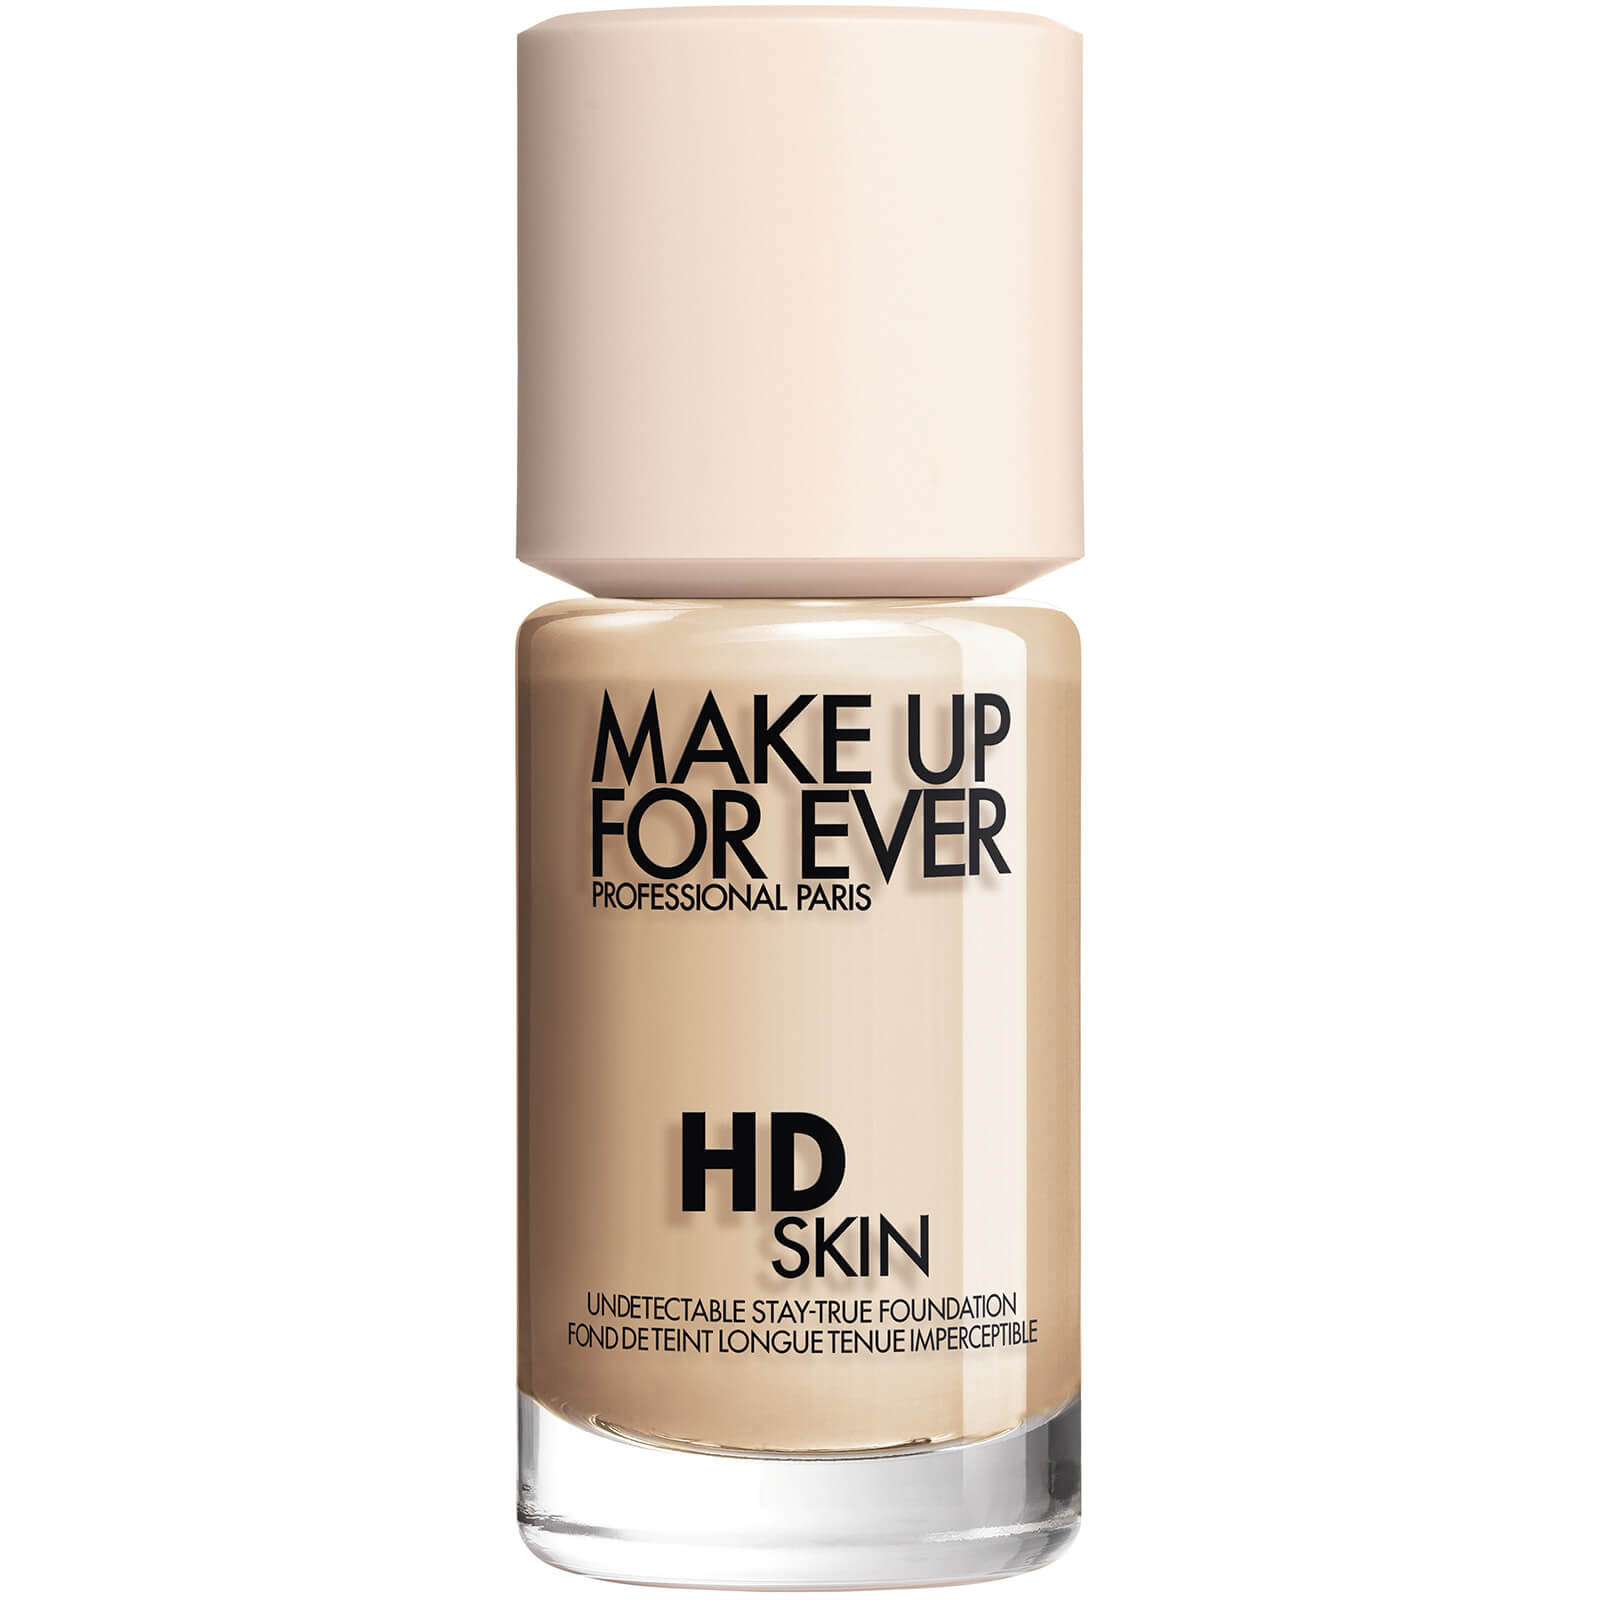 Make Up For Ever HD Skin Foundation 30ml (Various Shades) - 1N10 Ivory